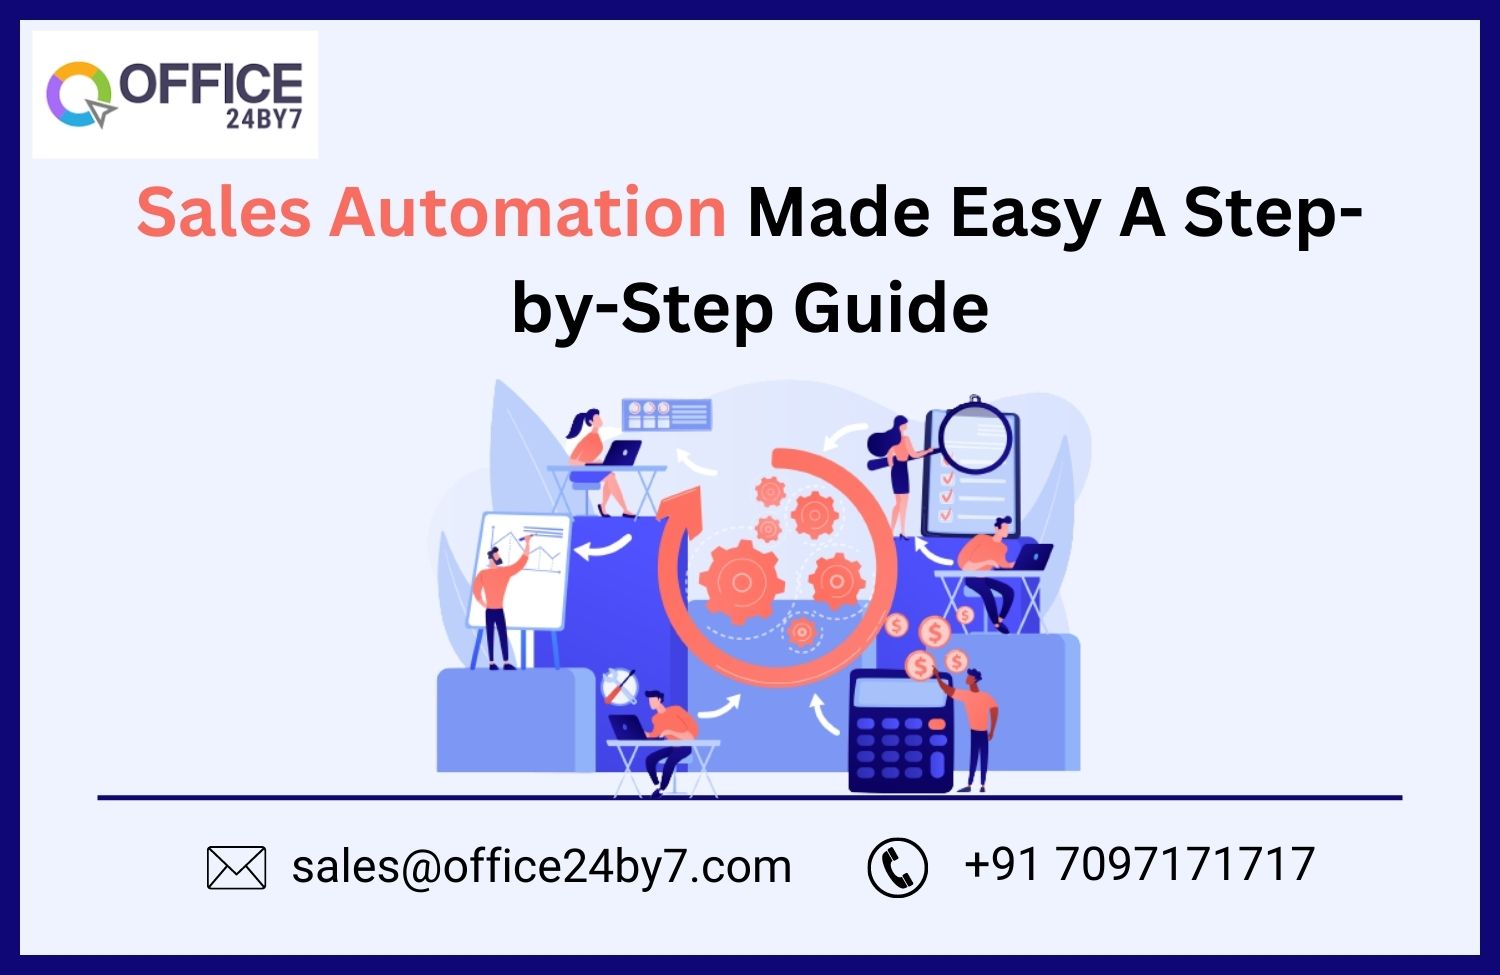 Sales Automation Made Easy A Step-by-Step Guide